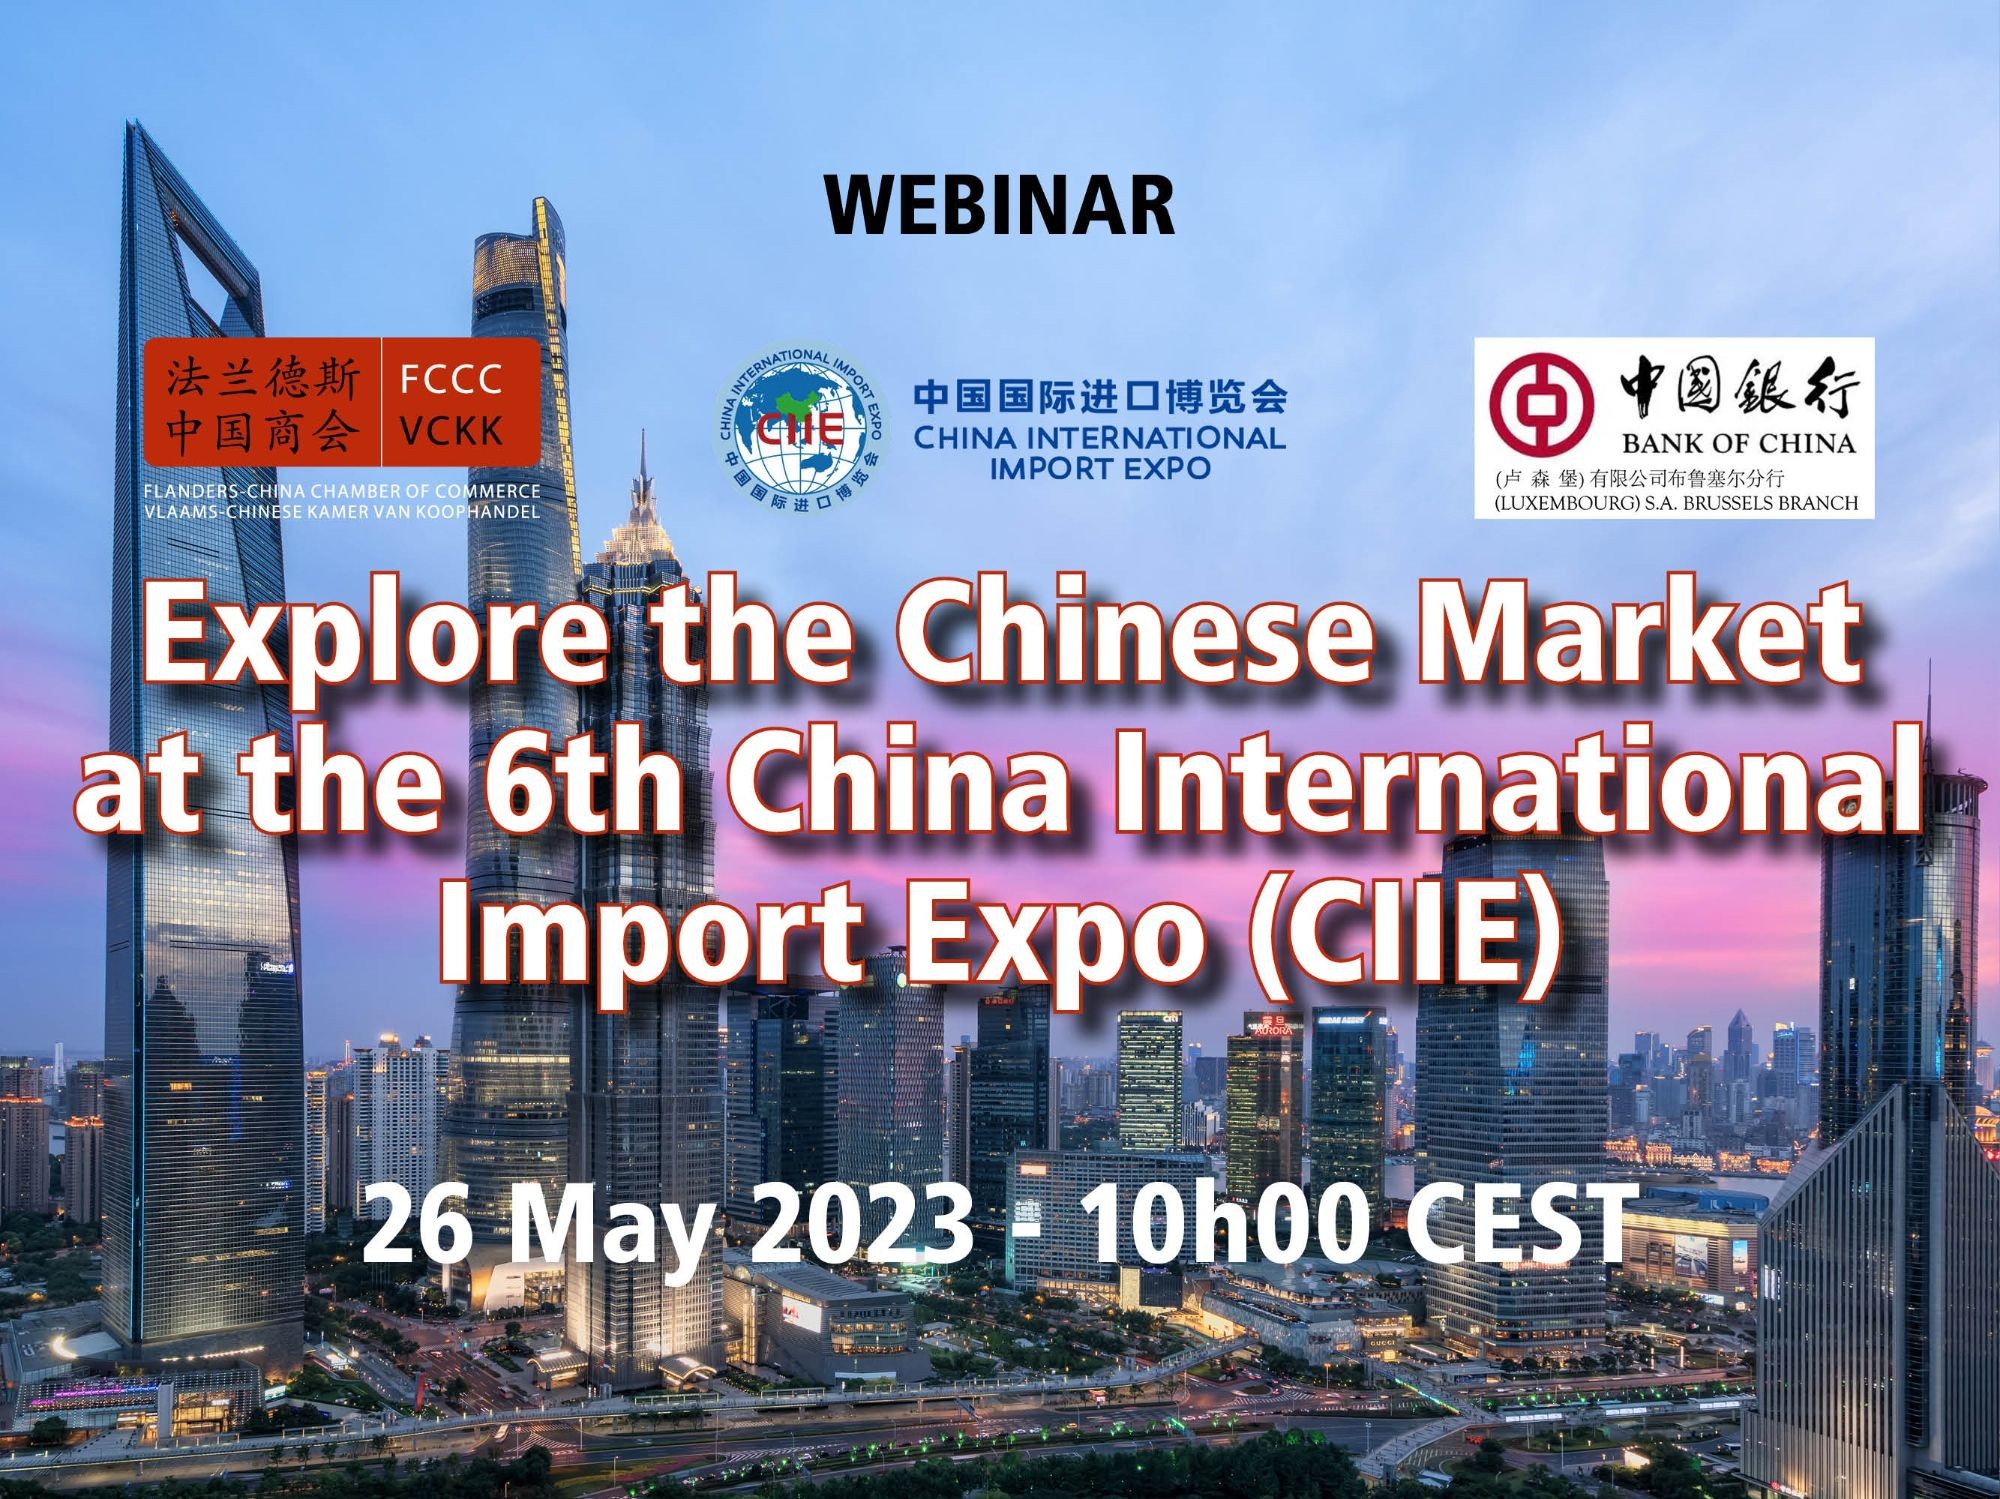 Webinar: Explore the Chinese Market at the 6th China International Import Expo (CIIE) - 26 May 2023 - 10h00 CEST